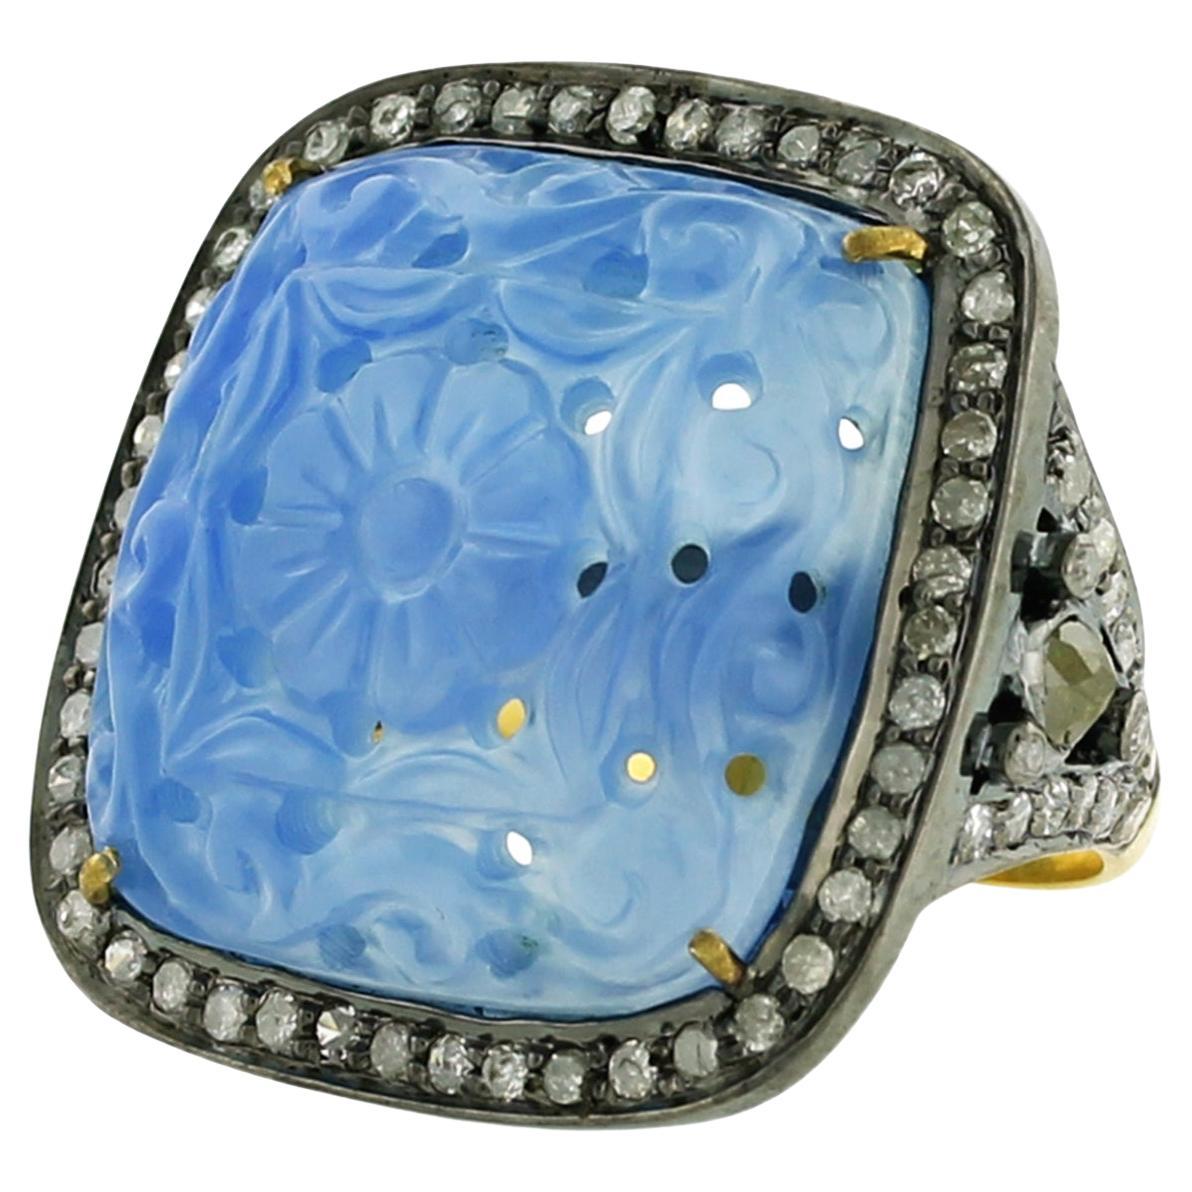 10.1 ct Blue Agate Cocktail Ring With Pave Diamonds Made In 18k Gold & Silver